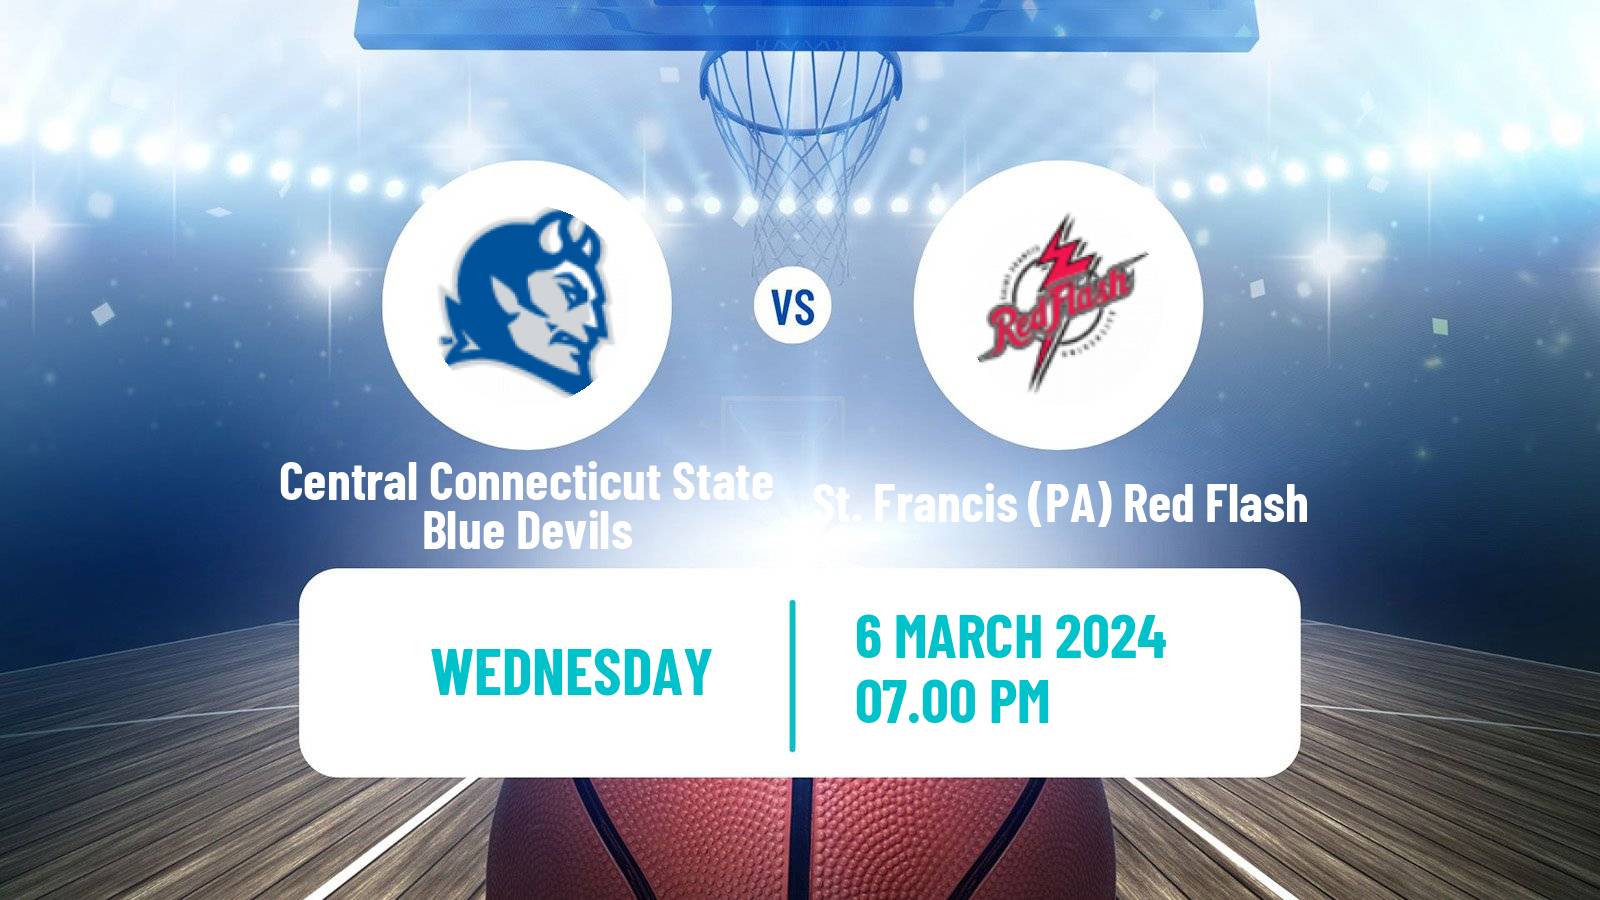 Basketball NCAA College Basketball Central Connecticut State Blue Devils - St. Francis (PA) Red Flash